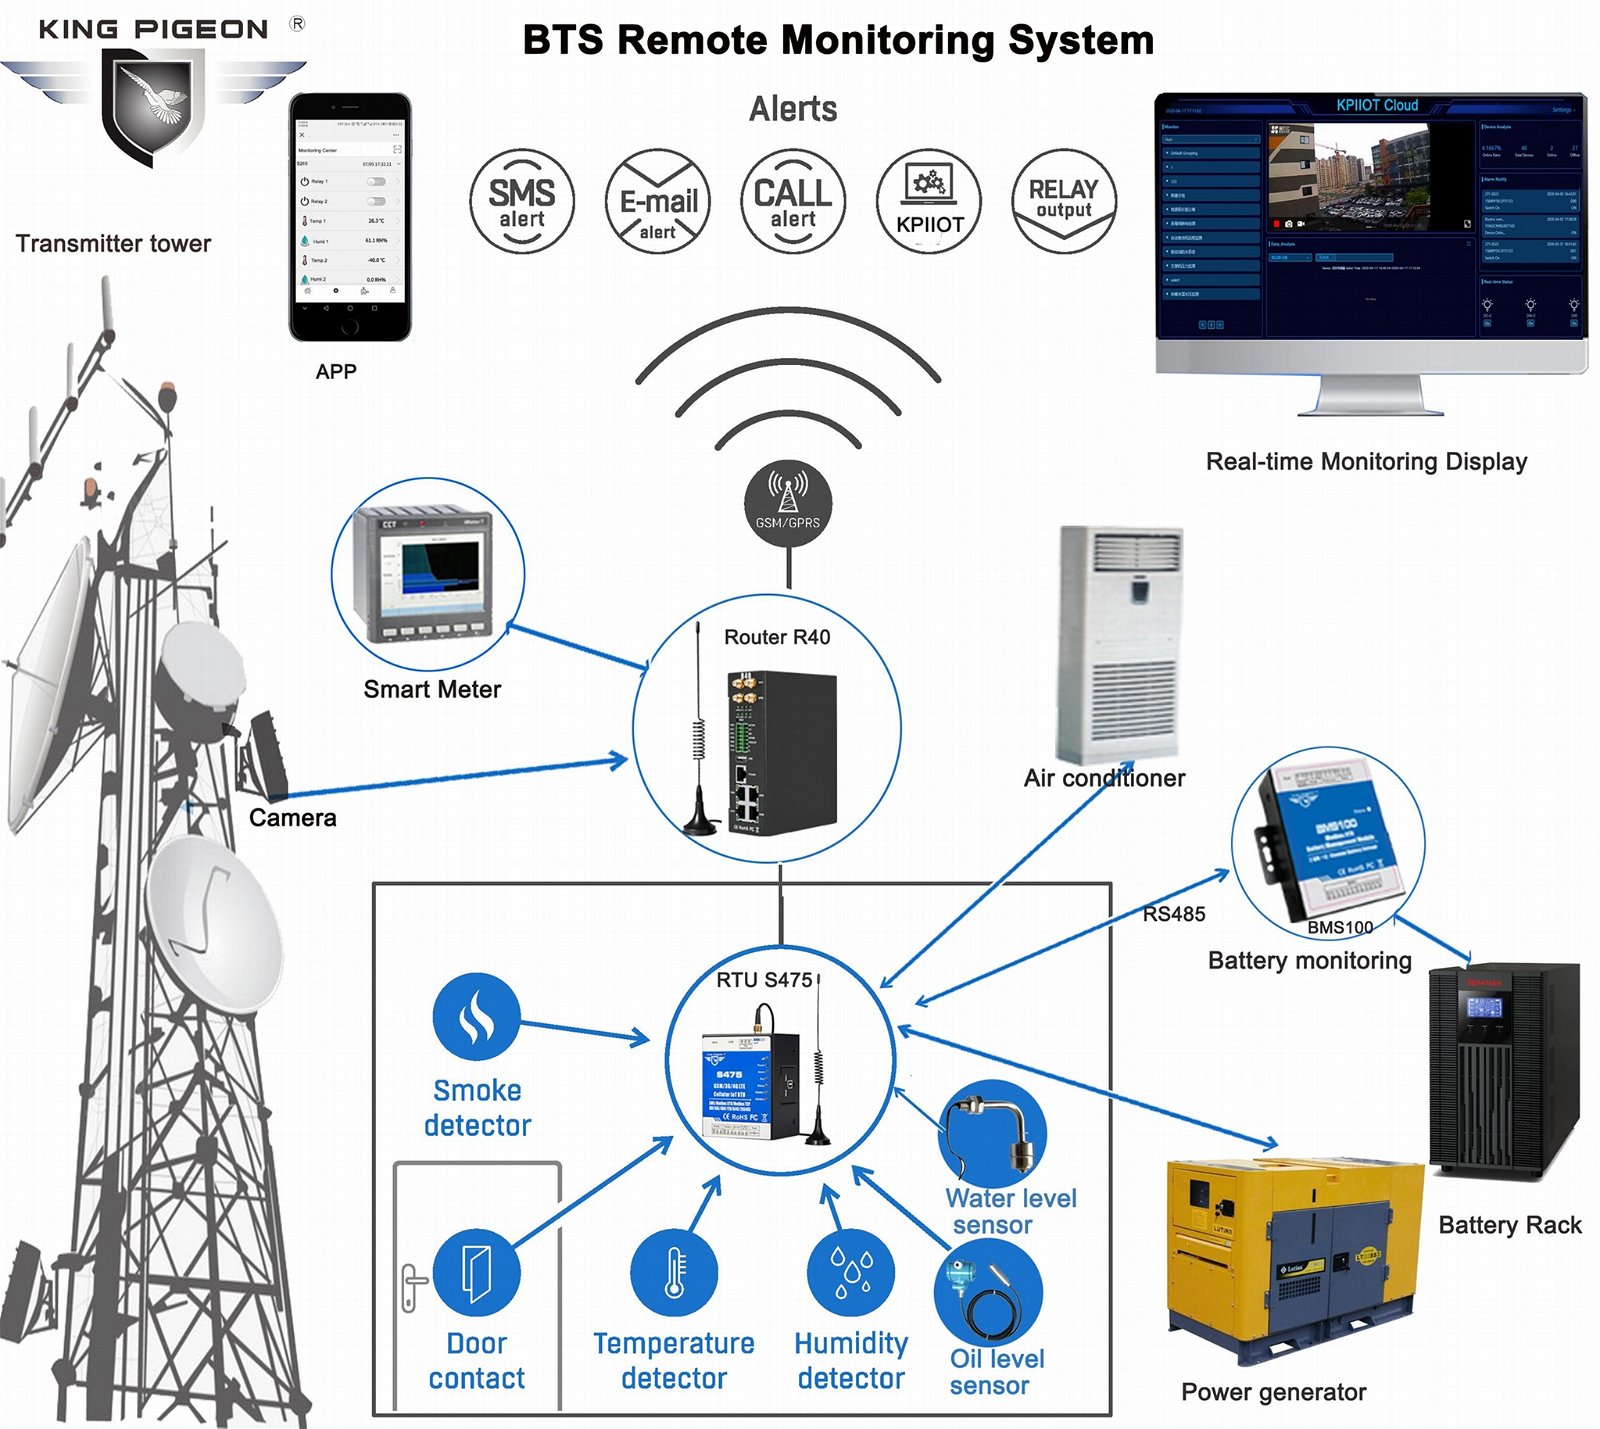 R40 4g lte router Remote CCTV enviroment monitoring IIot solution 5